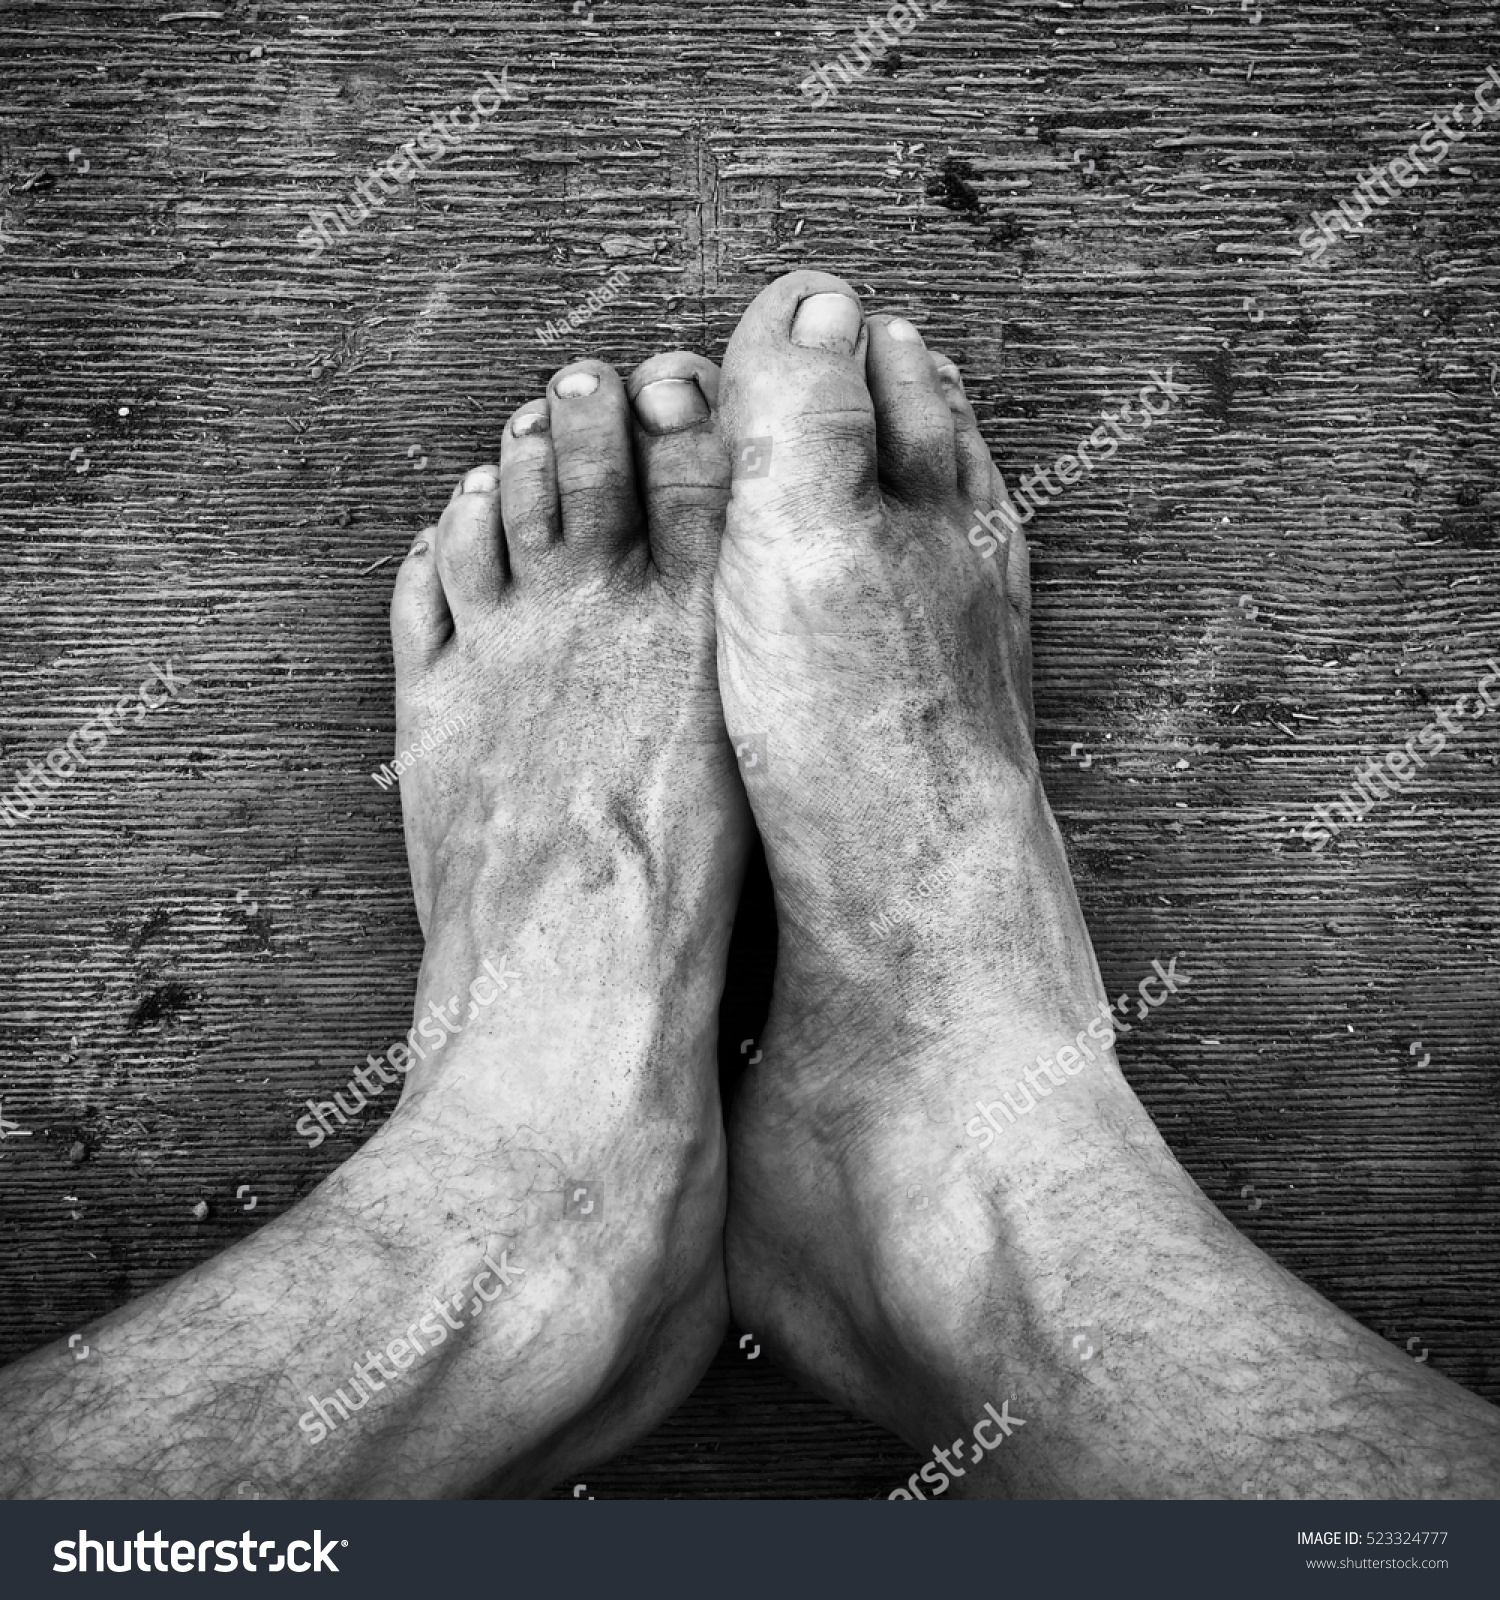 Black and white. Dirty feet on the wooden floor #523324777